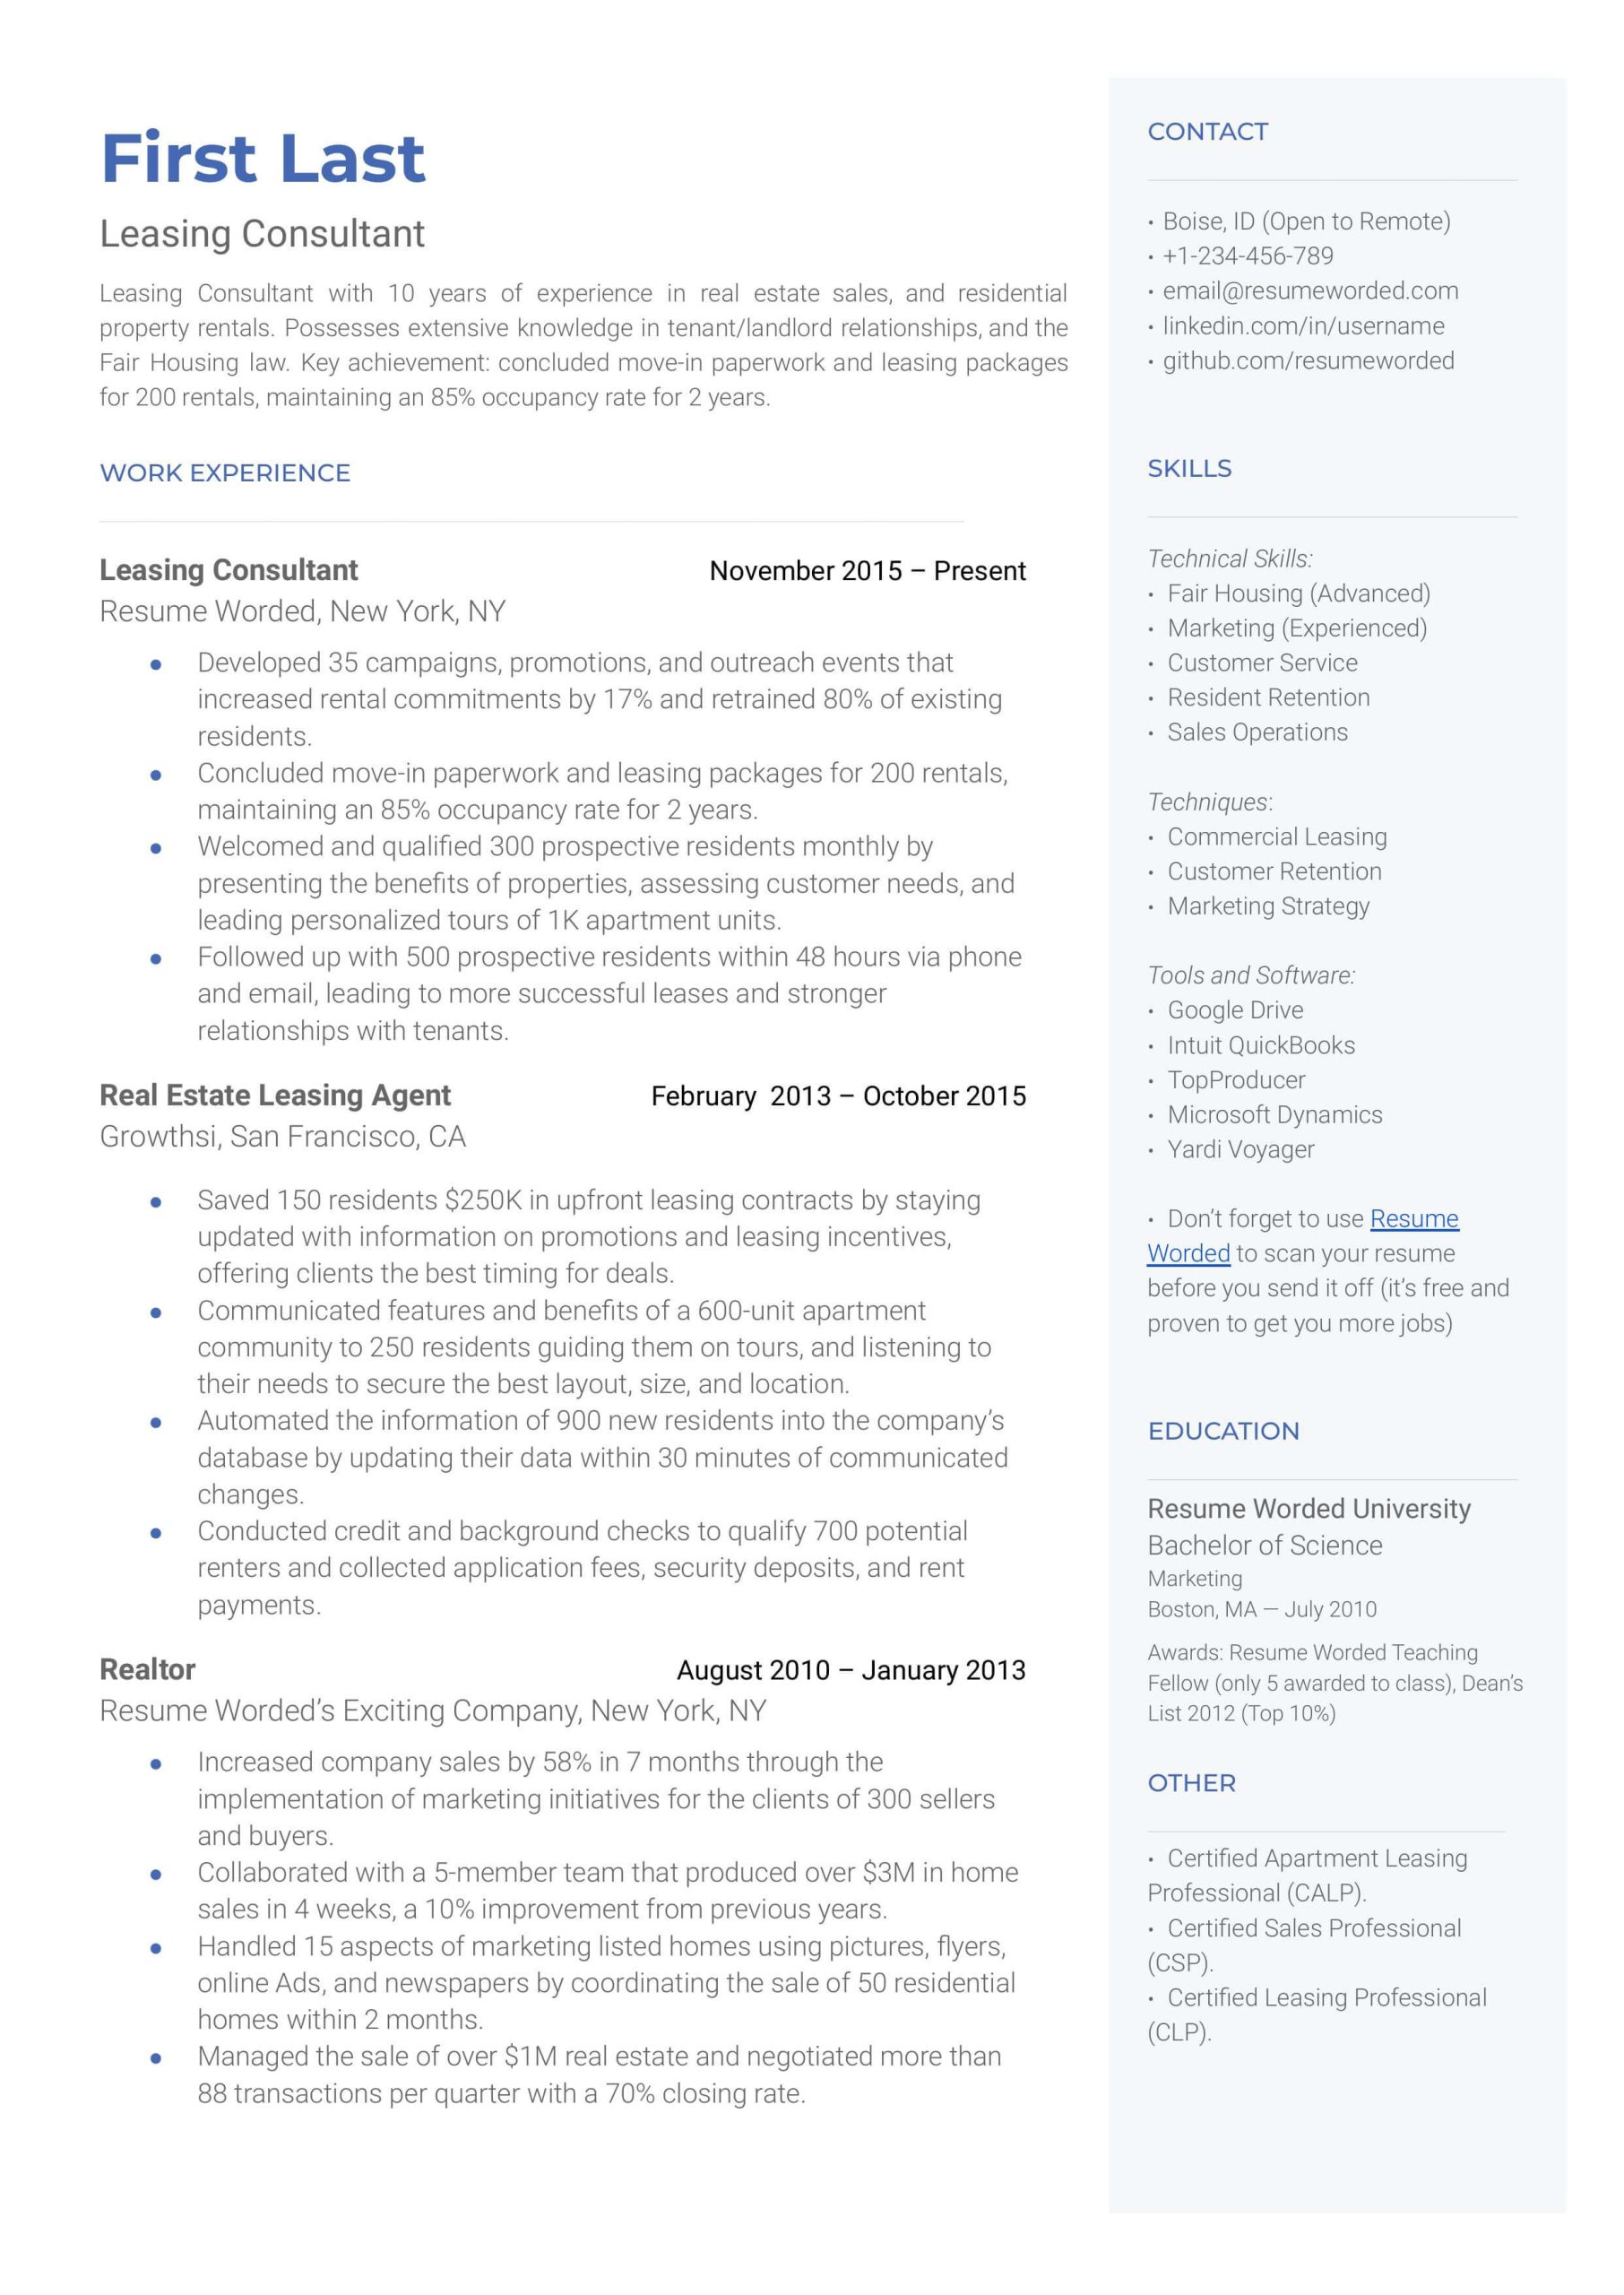 Entry Level Recruitment Consultant Resume Sample Resume Skills and Keywords for Recruitment Consultant (updated for …